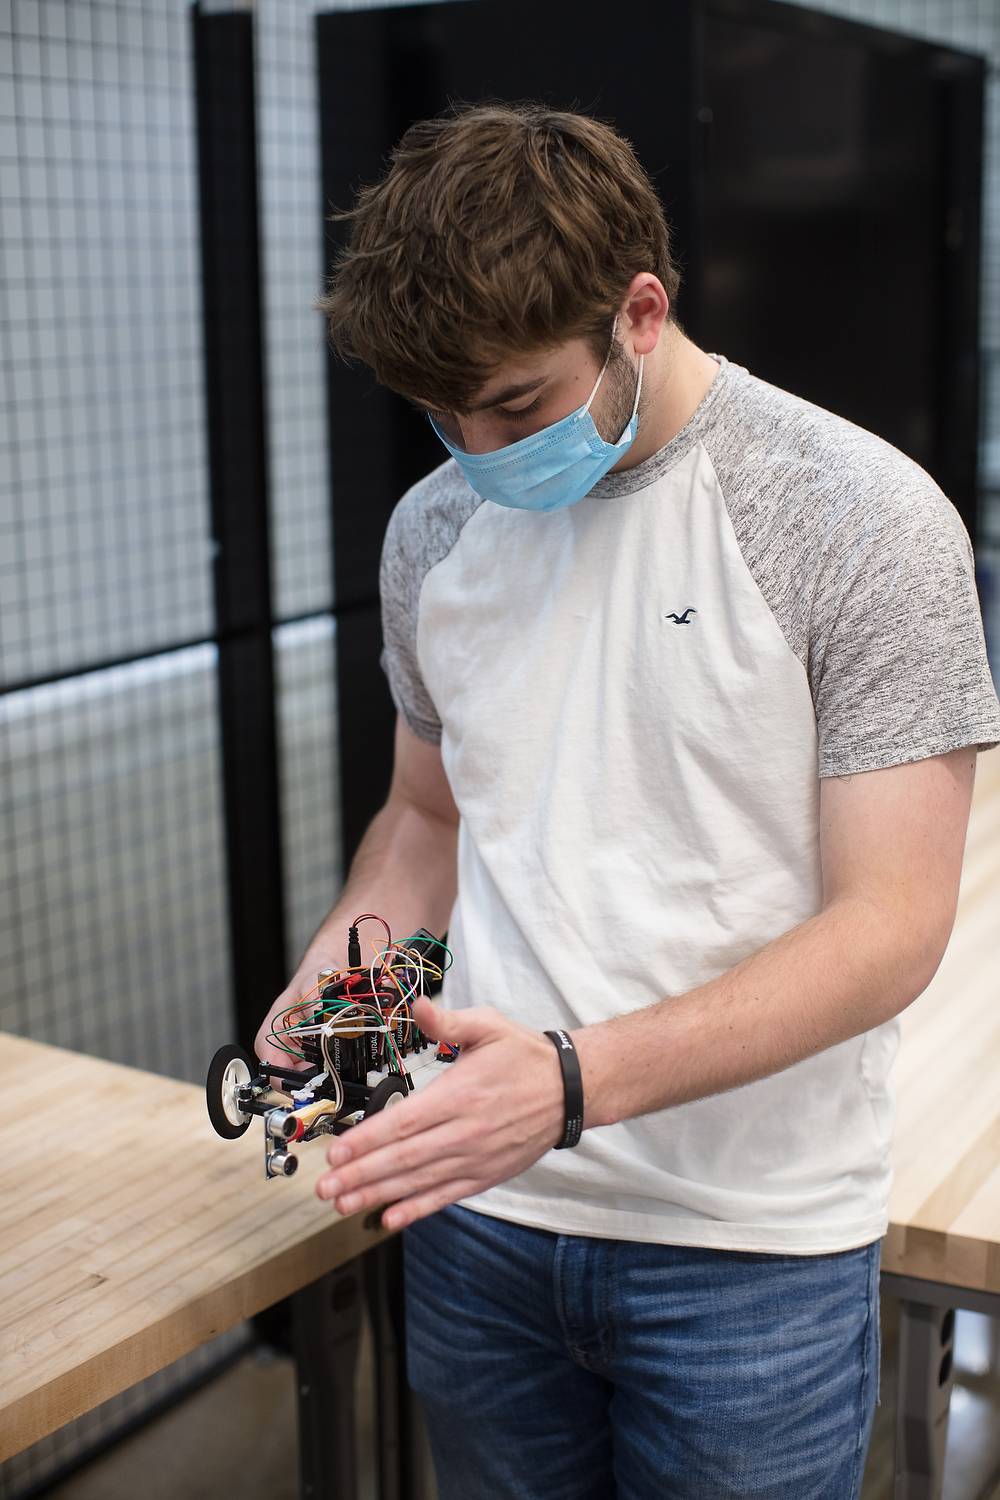 Student looks at robot